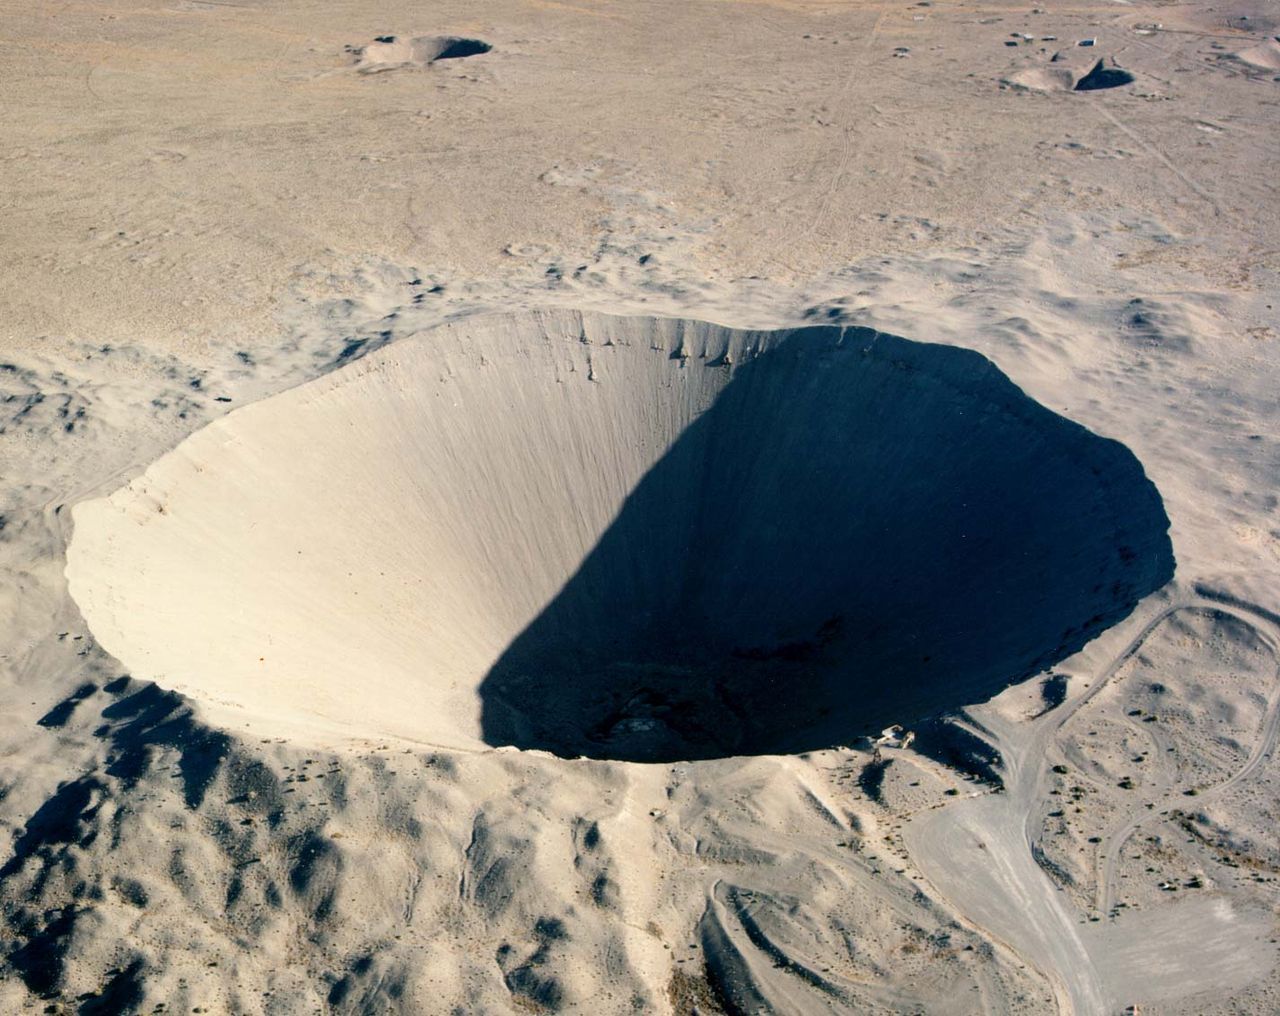 1962: The Largest Nuclear Crater in the World